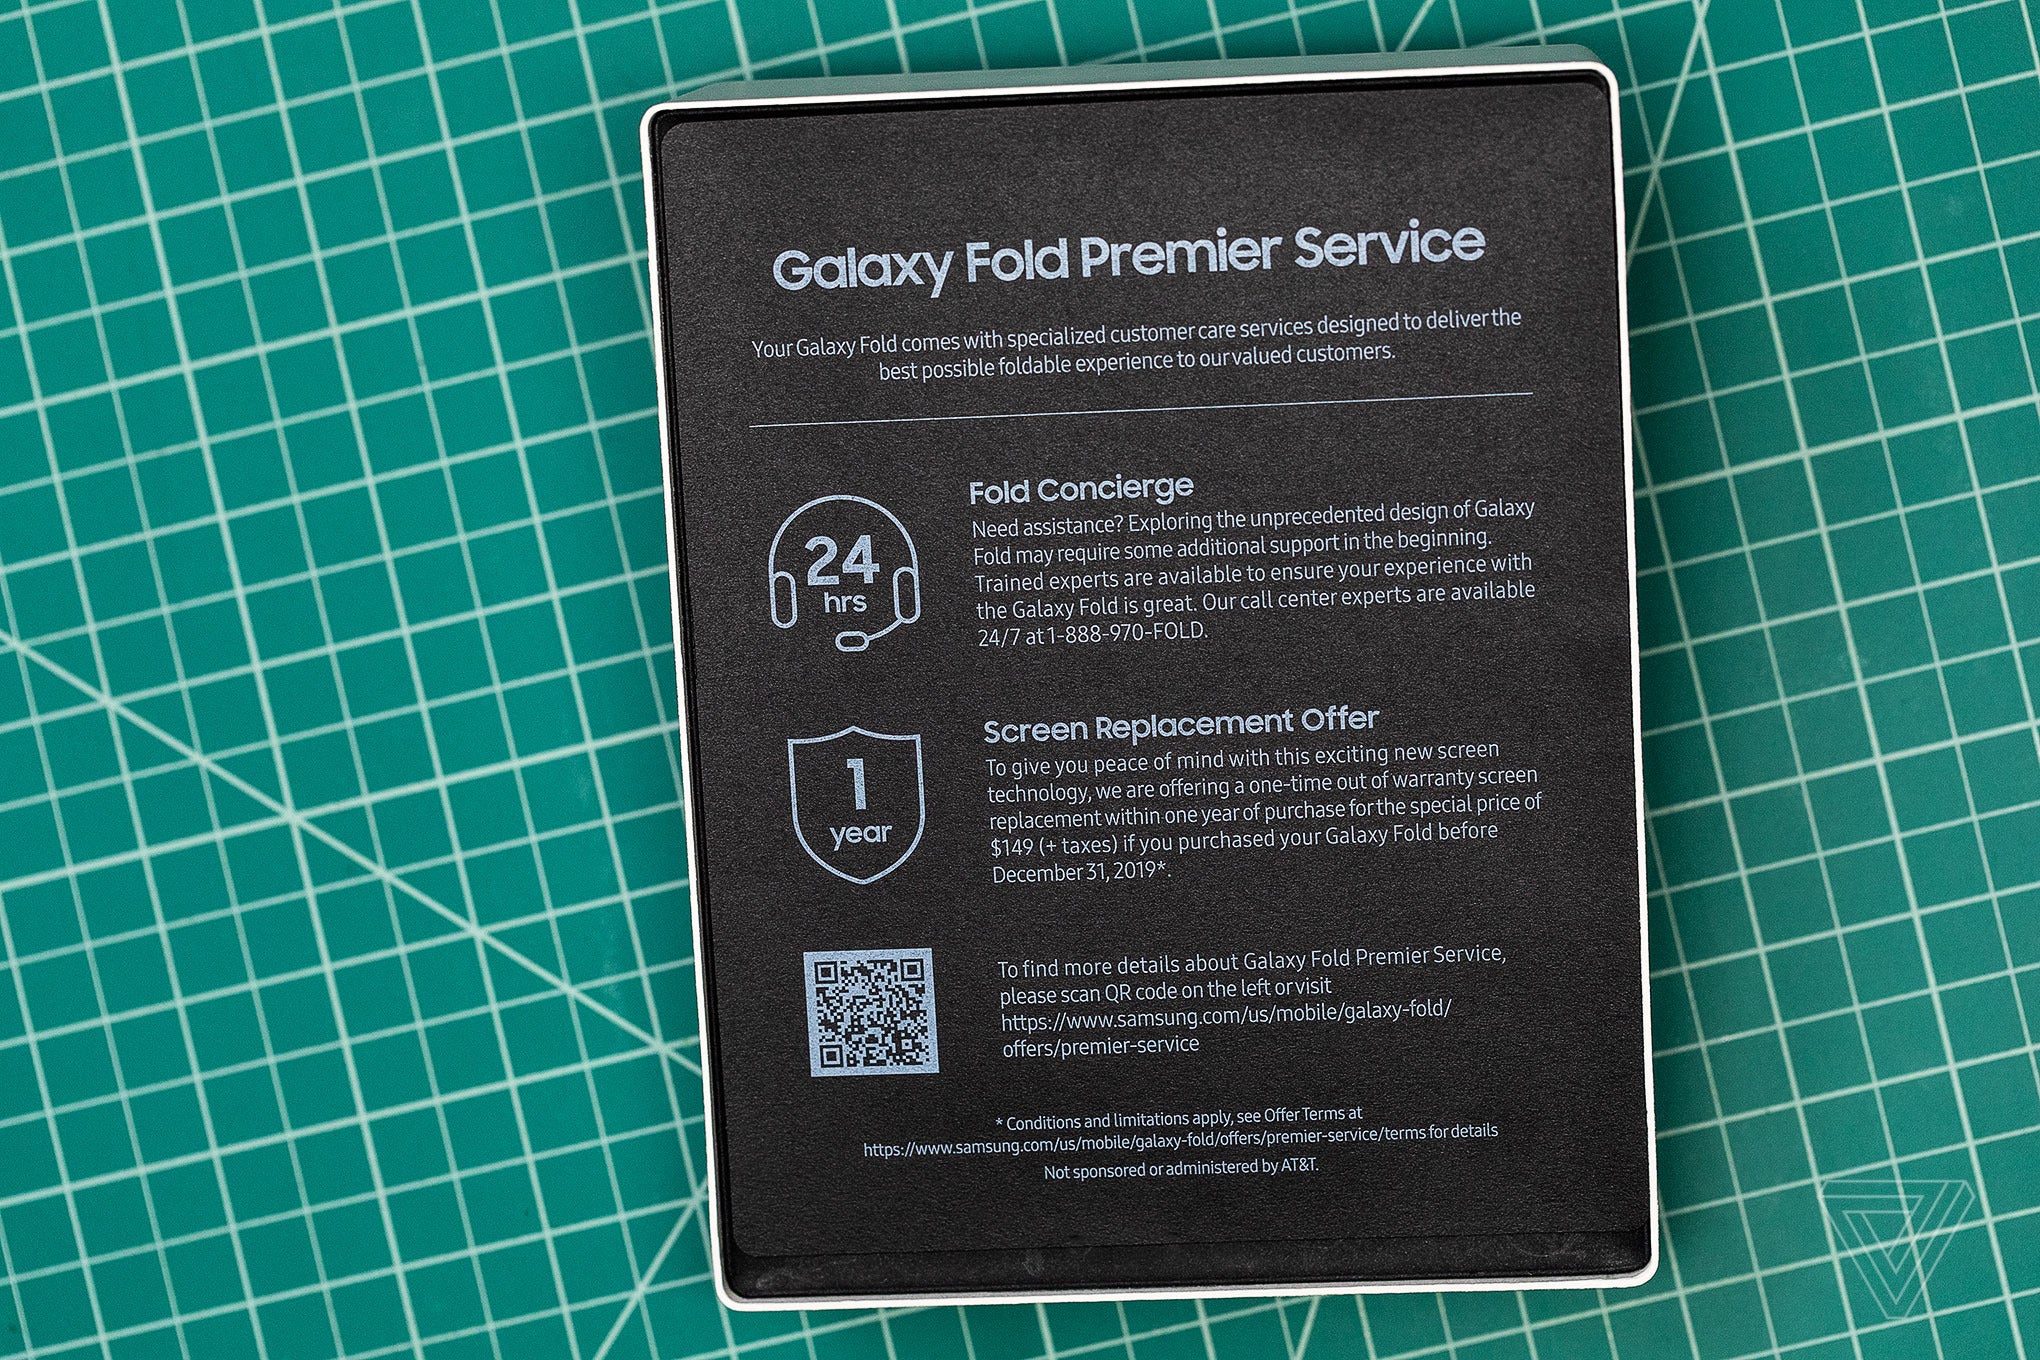 Samsung gives out instructions to Galaxy Fold users - Samsung to give Galaxy Fold owners a one-time break on a screen replacement